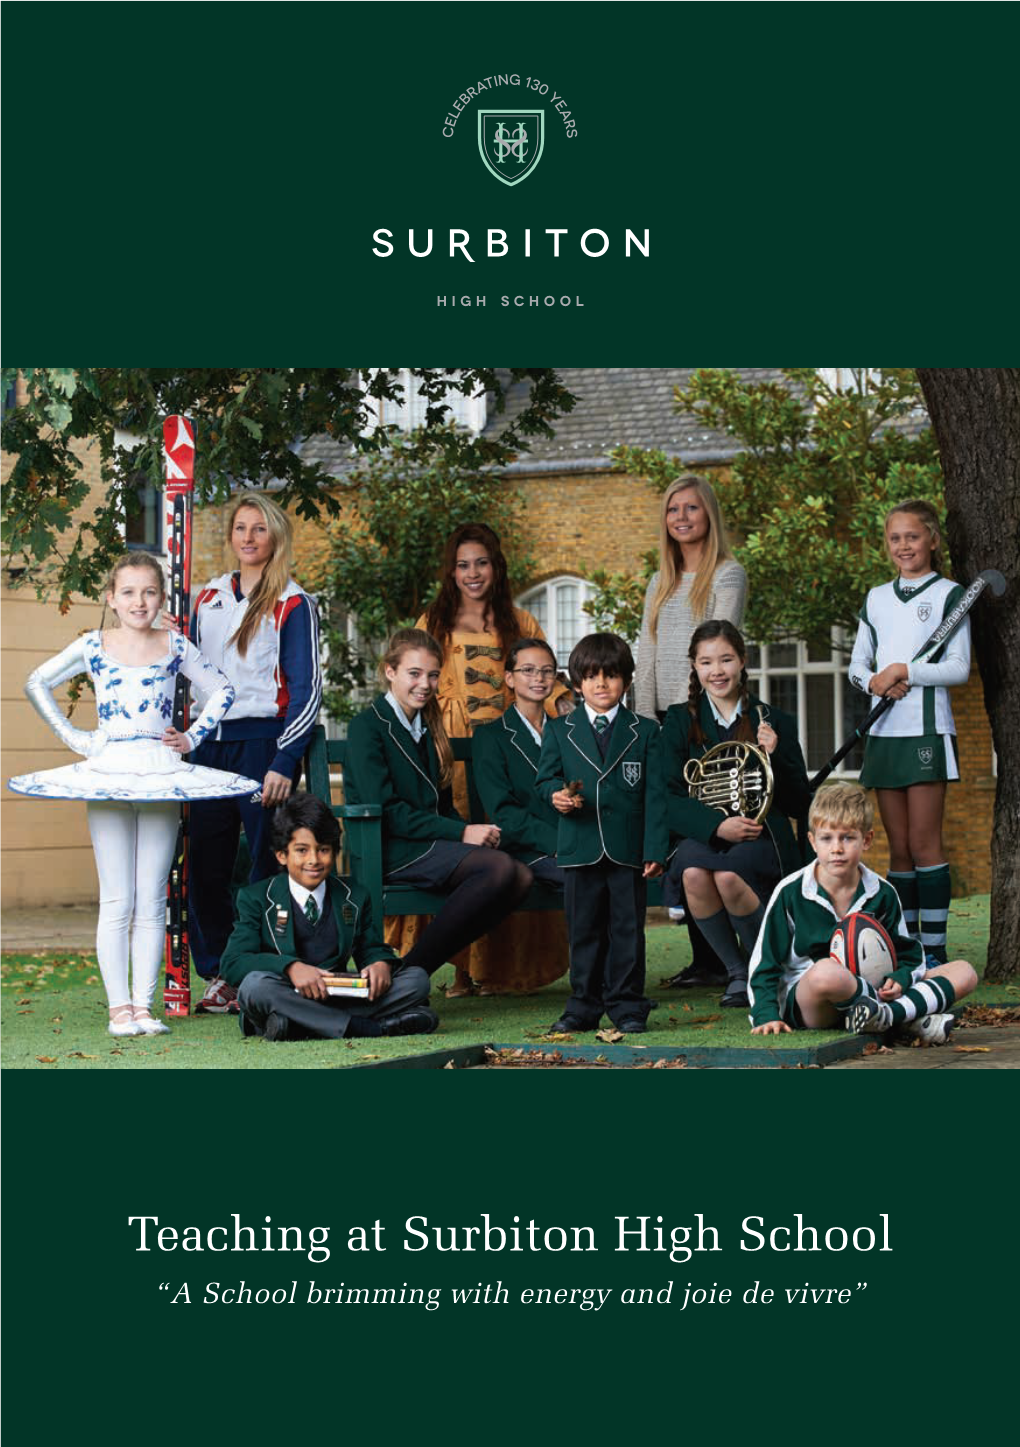 Teaching at Surbiton High School “A School Brimming with Energy and Joie De Vivre” Word from Ann Haydon, Principal